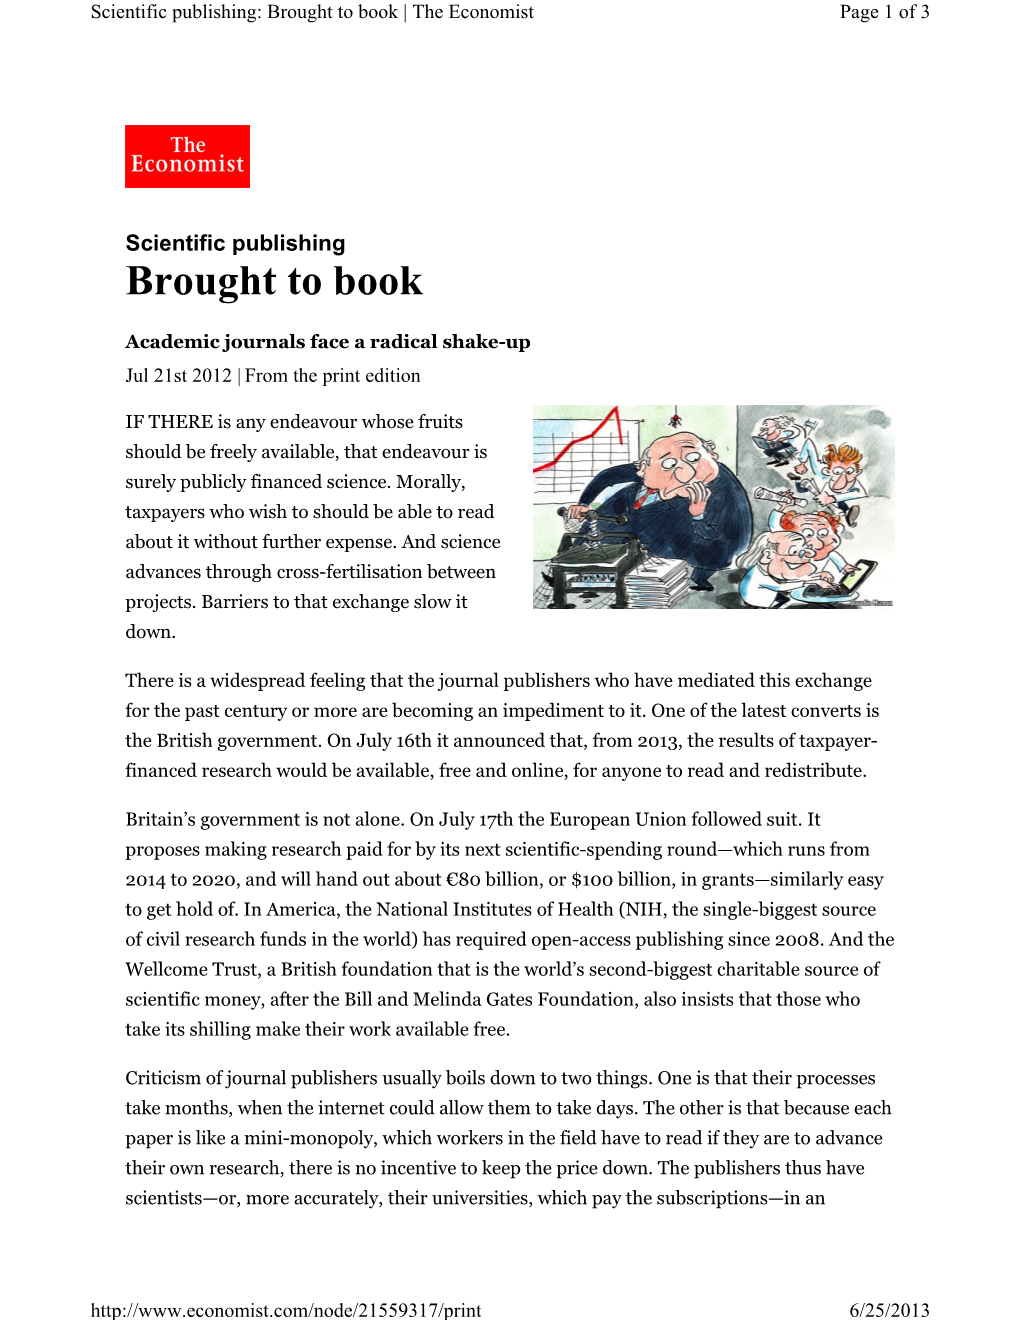 Brought to Book | the Economist Page 1 of 3